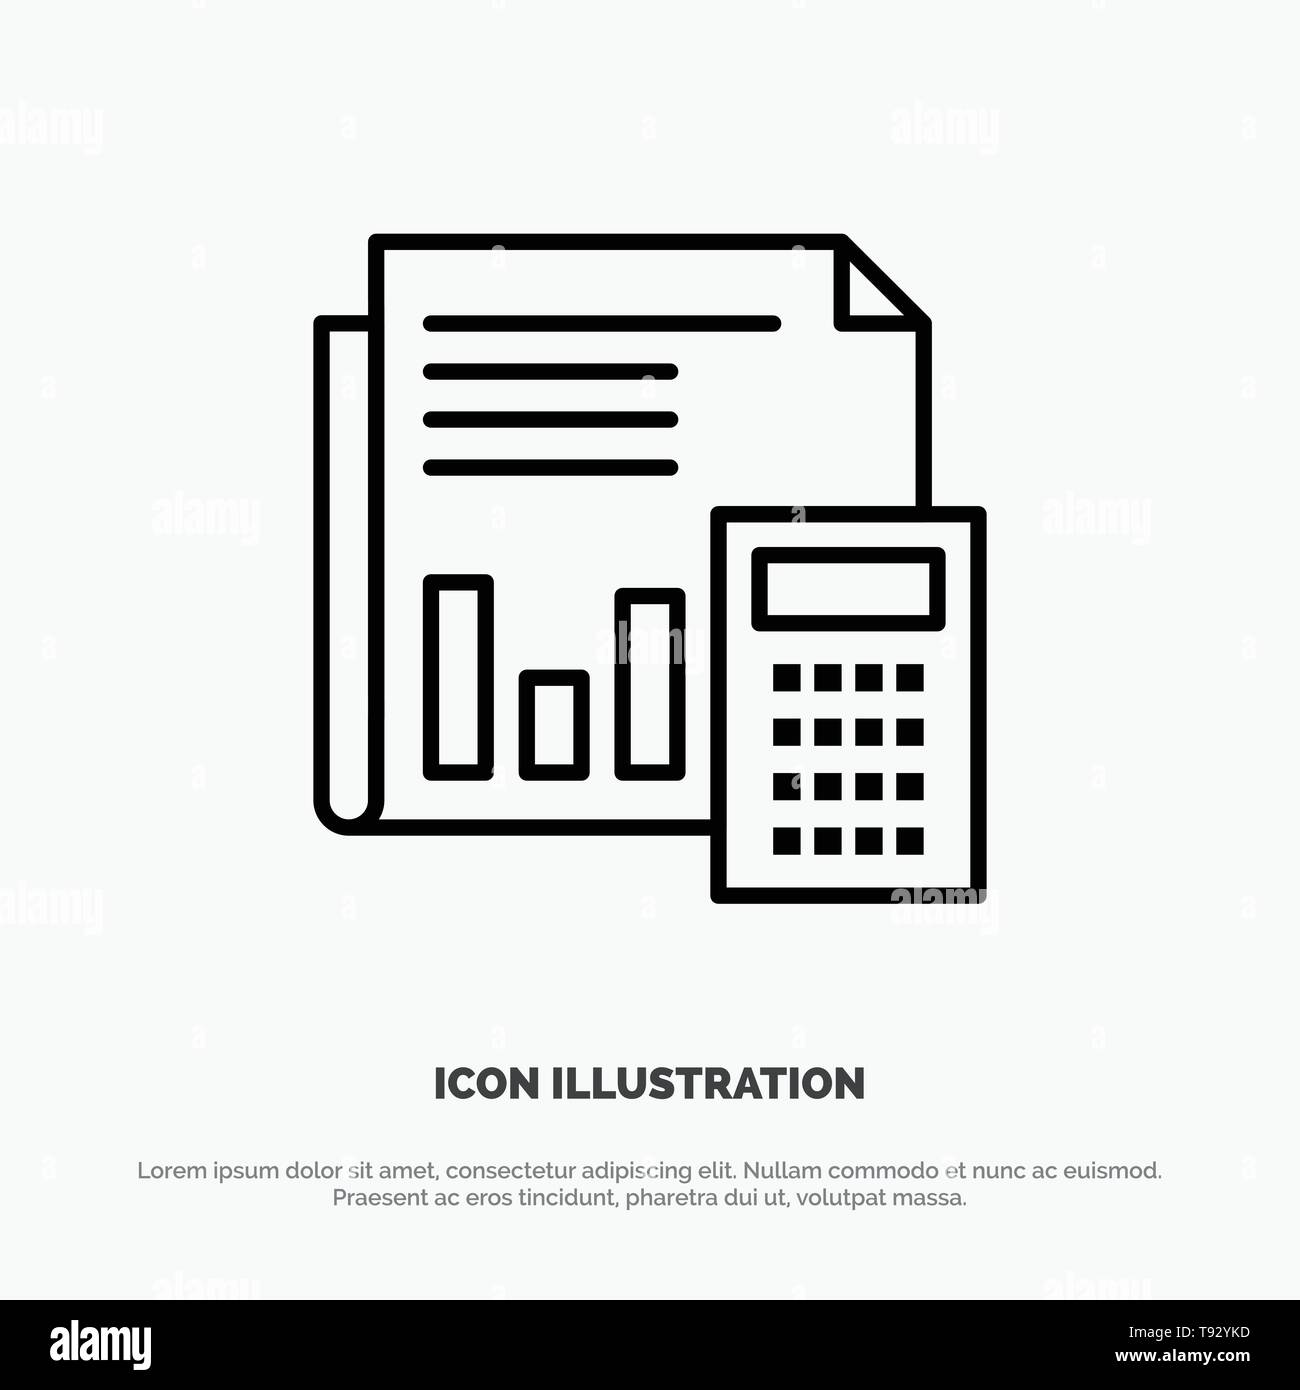 Audit, Accounting, Banking, Budget, Business, Calculation, Financial, Report Line Icon Vector Stock Vector